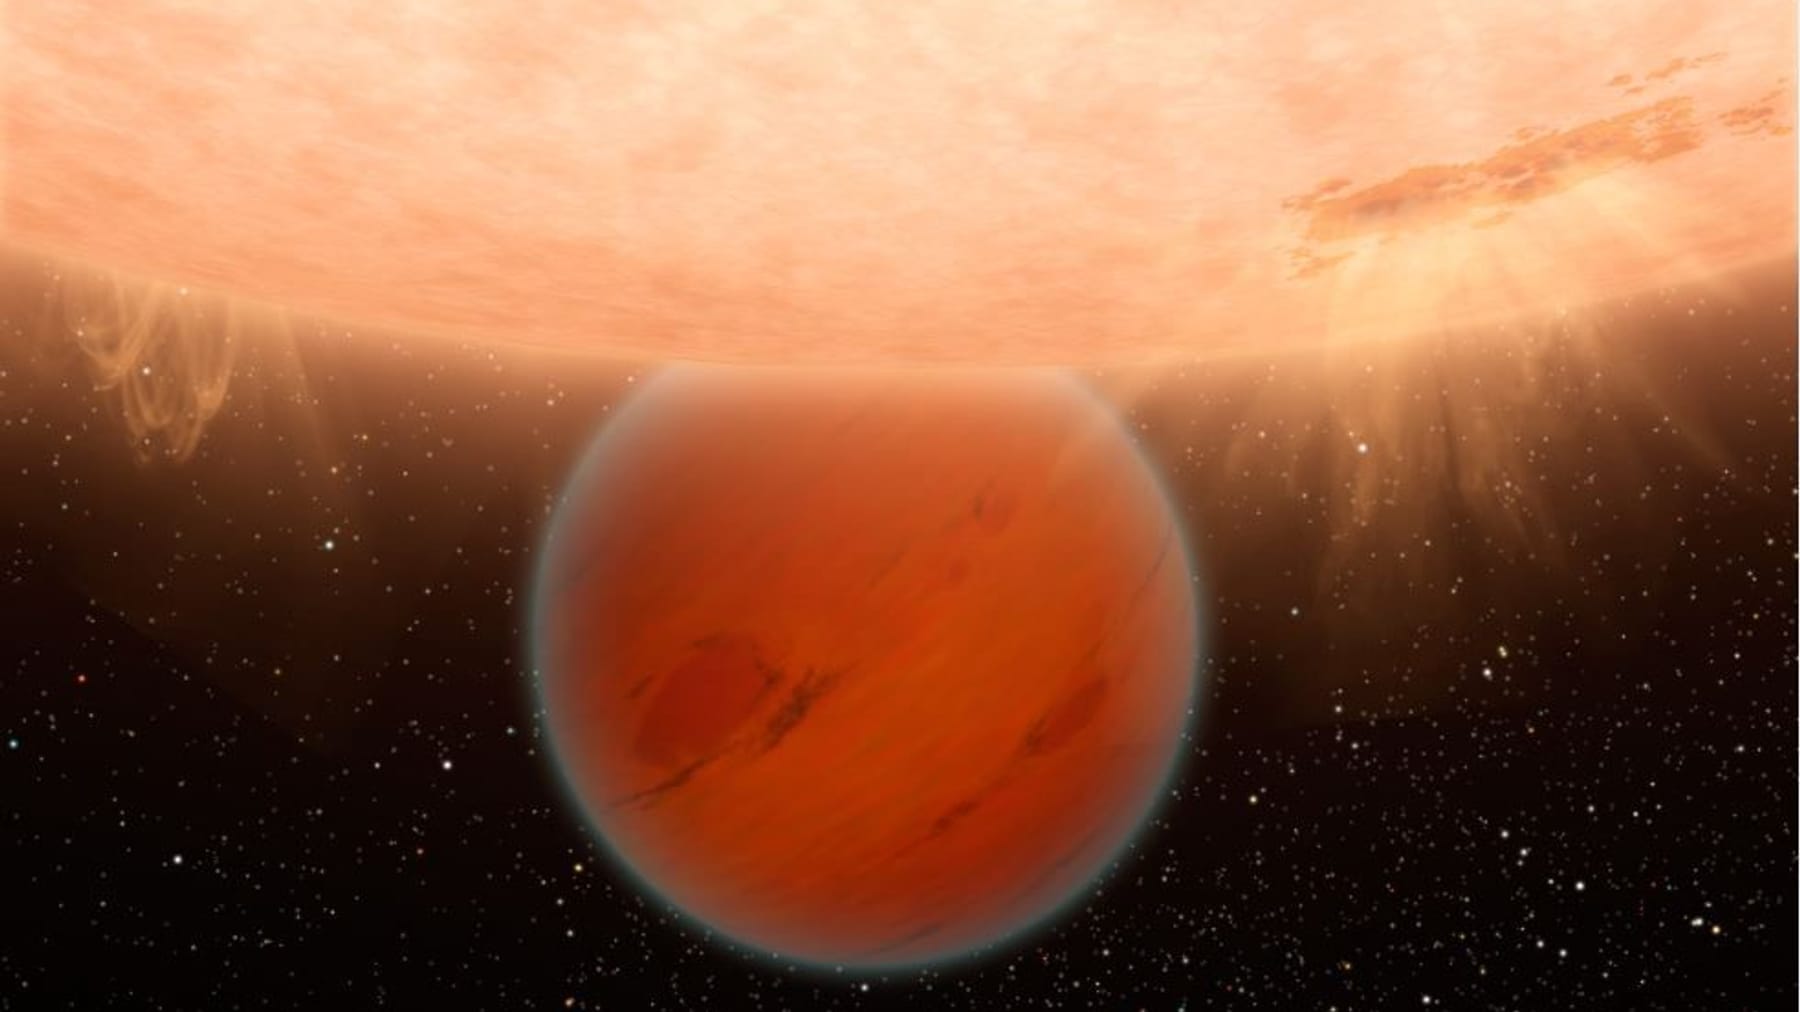 Exoplanet TOI-1853 b may not exist